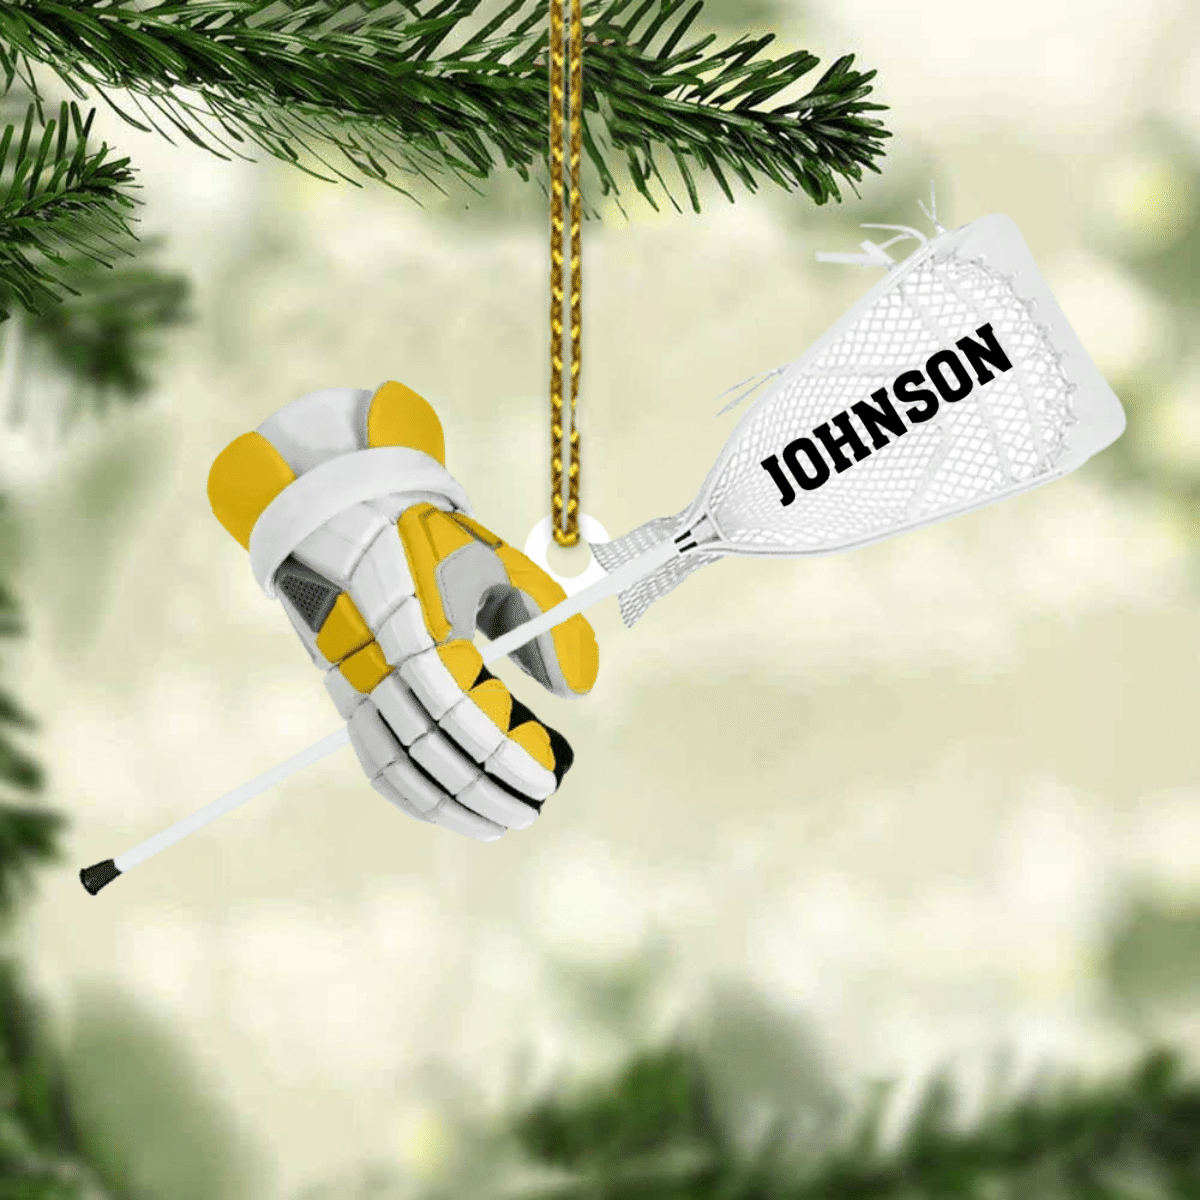 Personalized Lacrosse Gloves And Stick Cut Flat Acrylic Ornament Christmas Gift For Lacrosse Lover